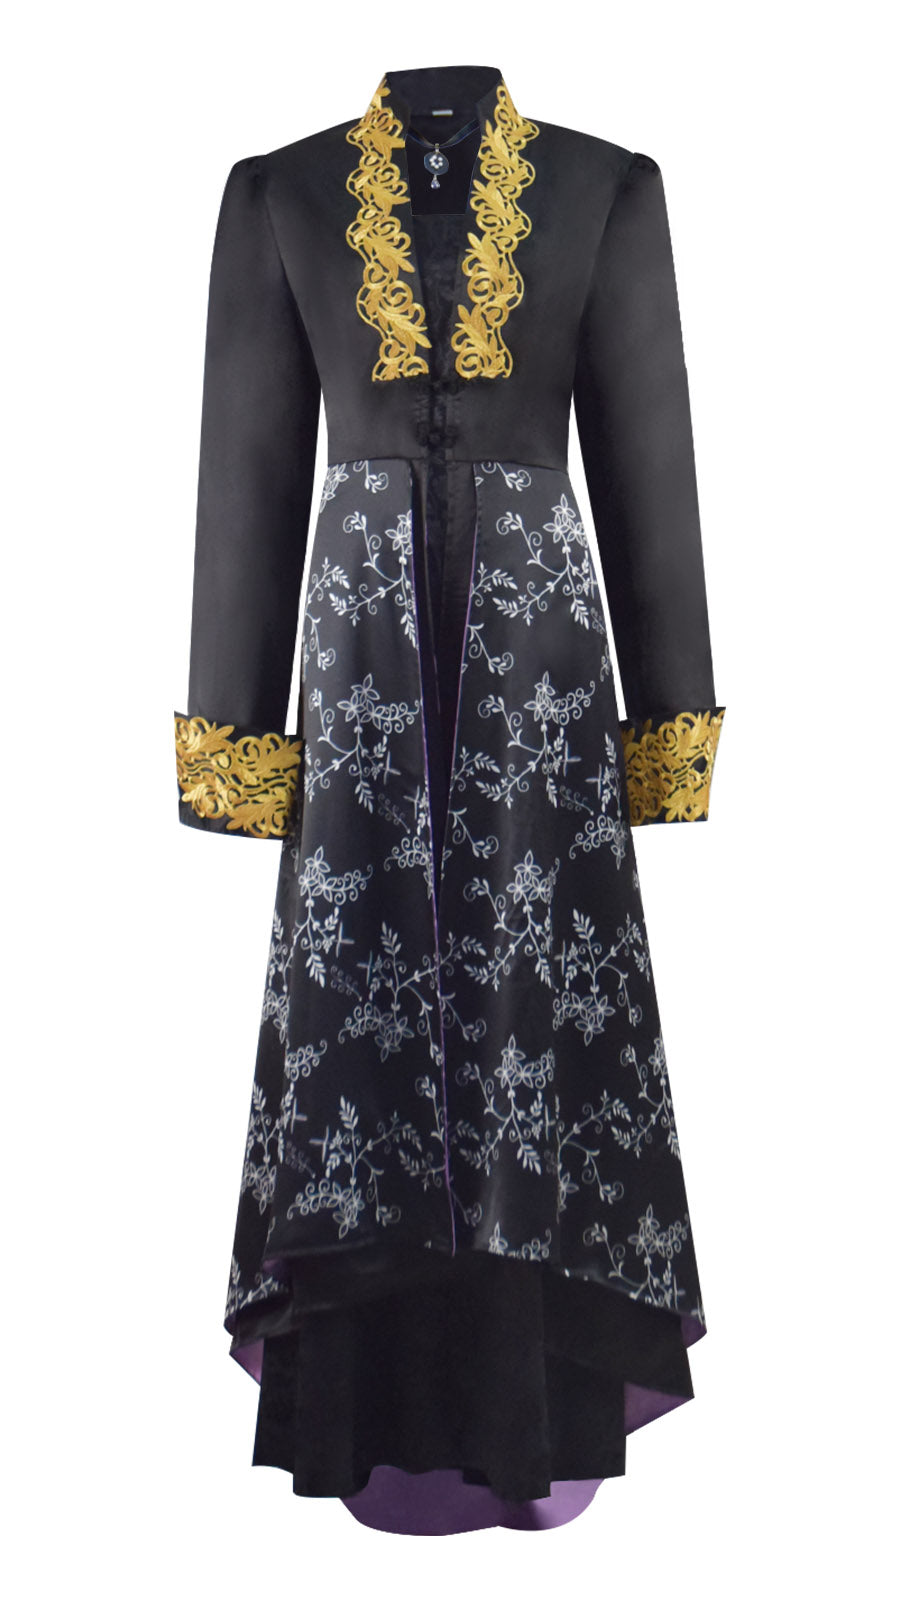 The Witcher Season 2 Costumes Yennefer Cosplay Black Coat Dress